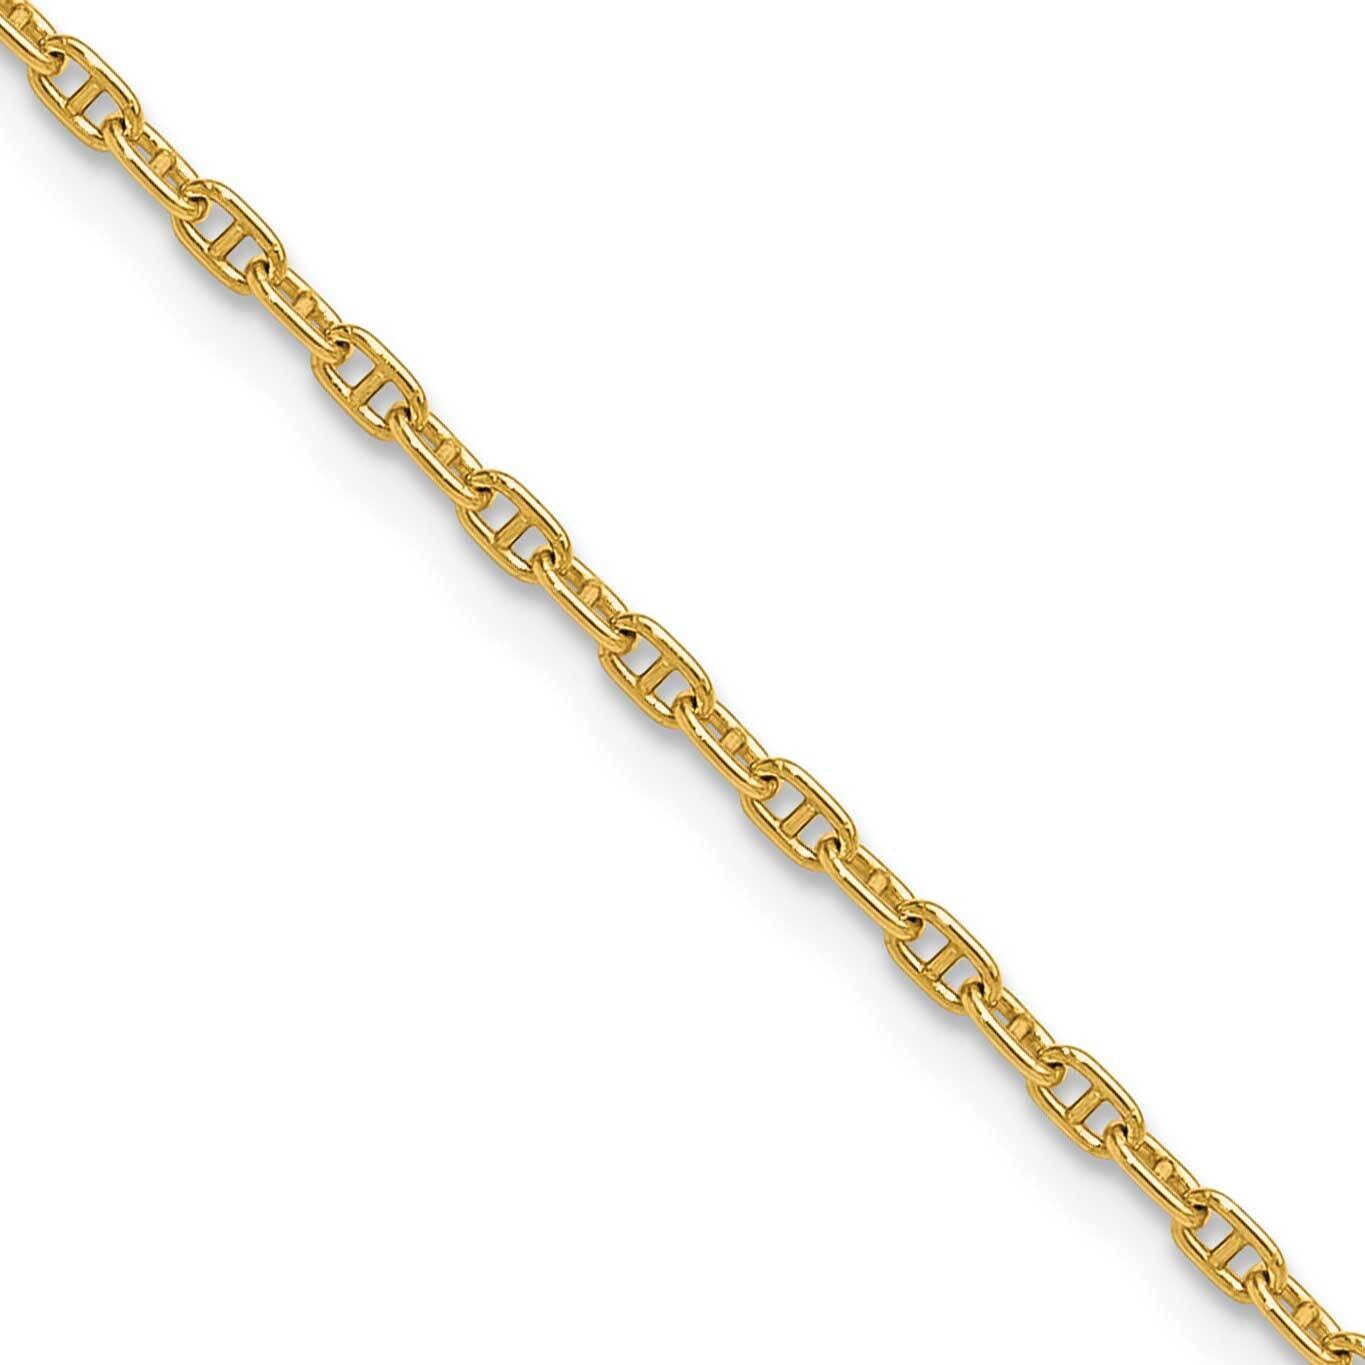 1.8mm Mariners Link Chain 16 Inch 14k Gold MA050-16